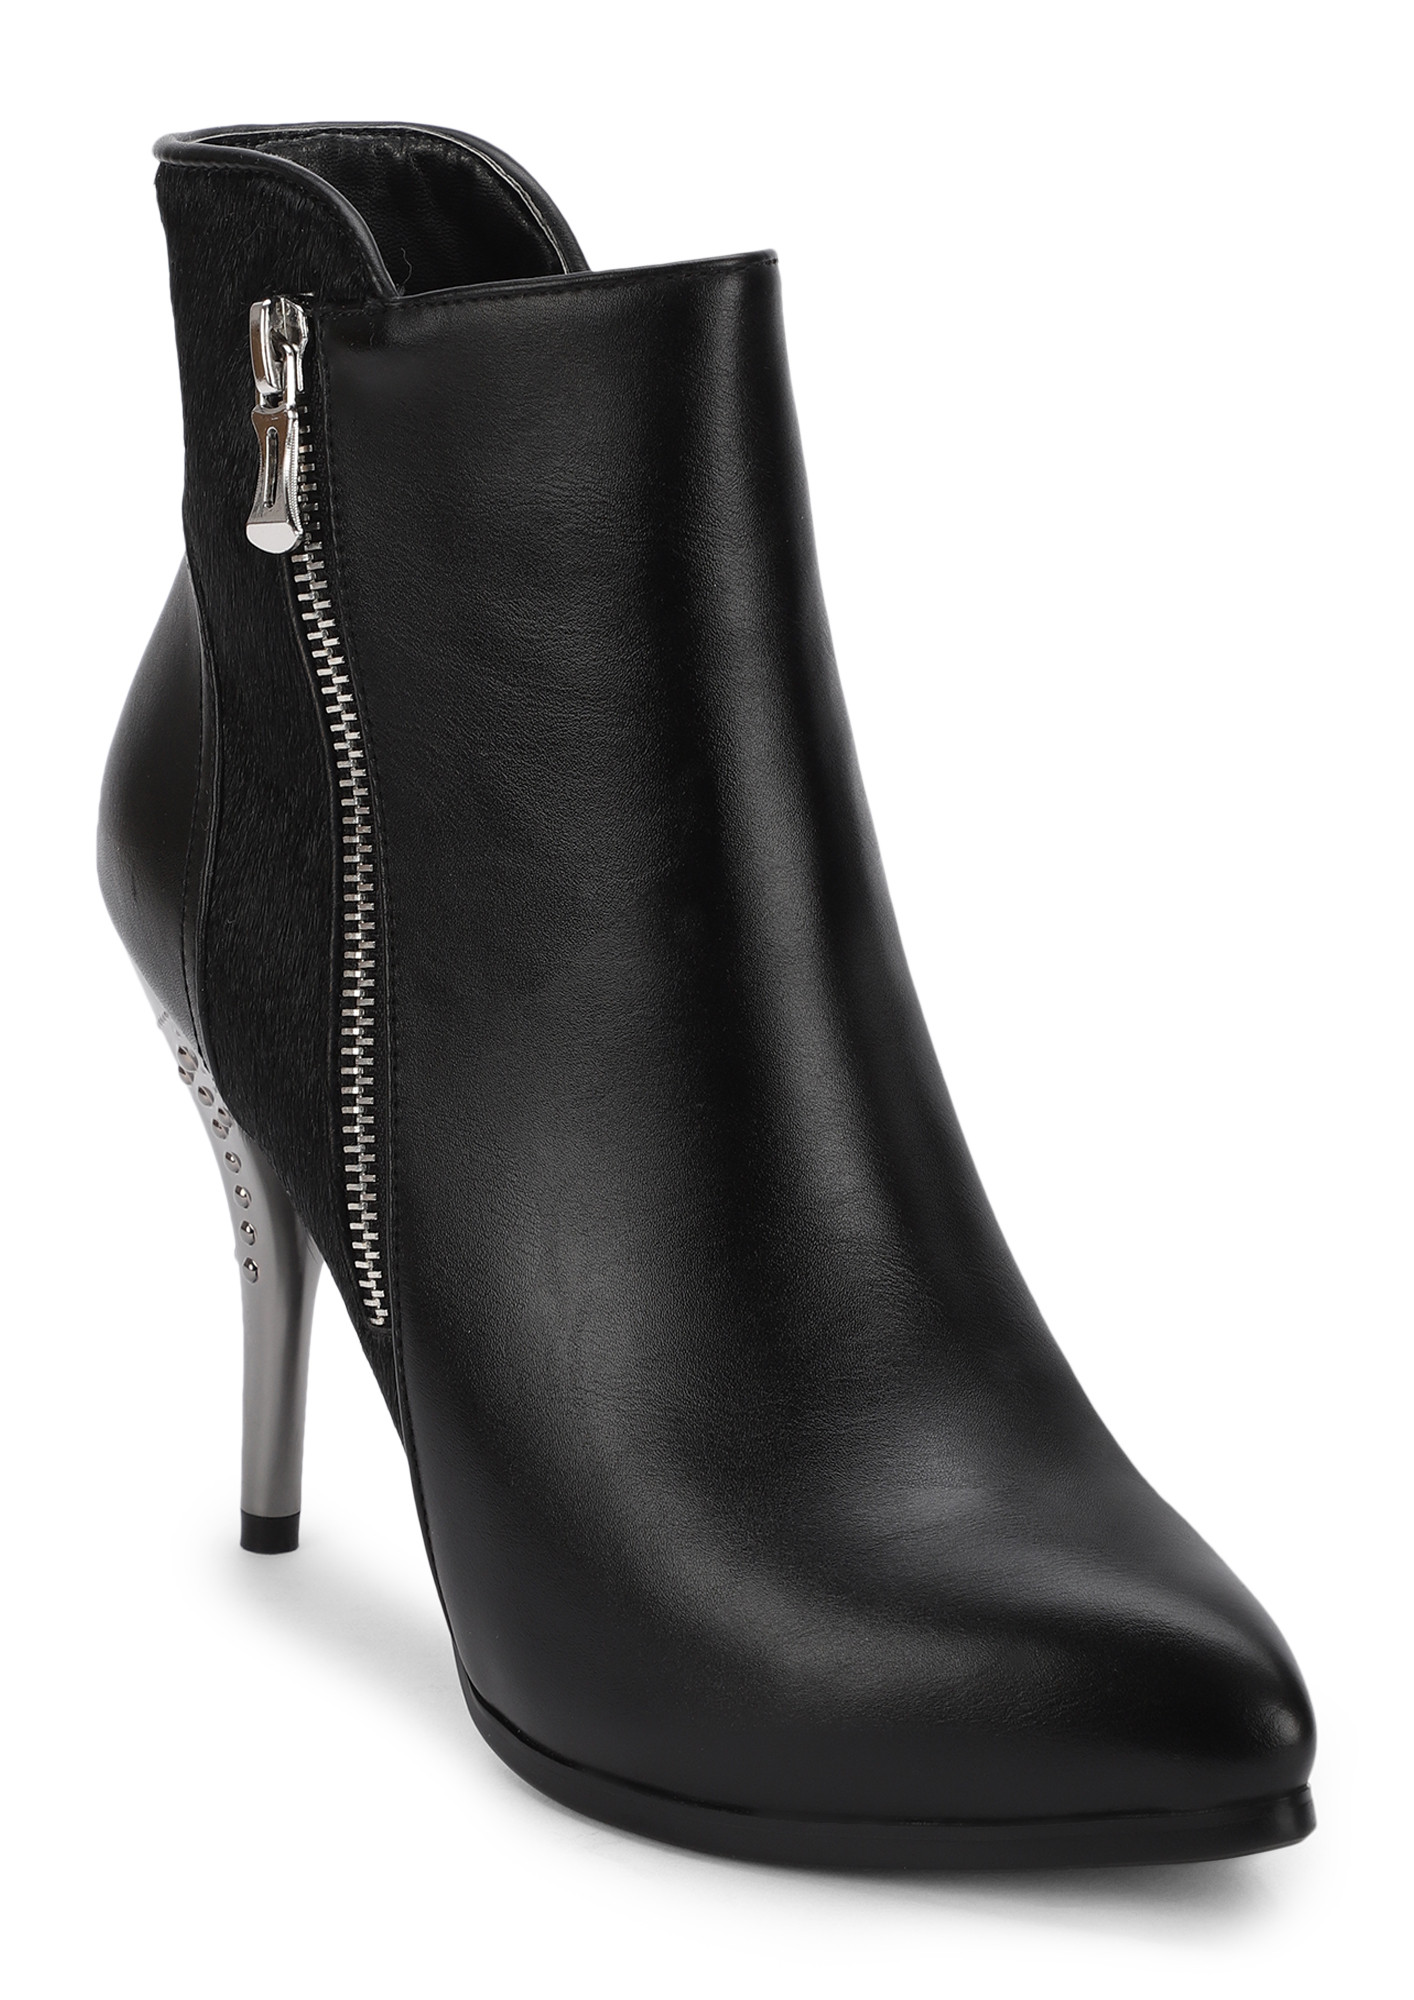 SIDE TO SIDE BLACK ANKLE BOOTS